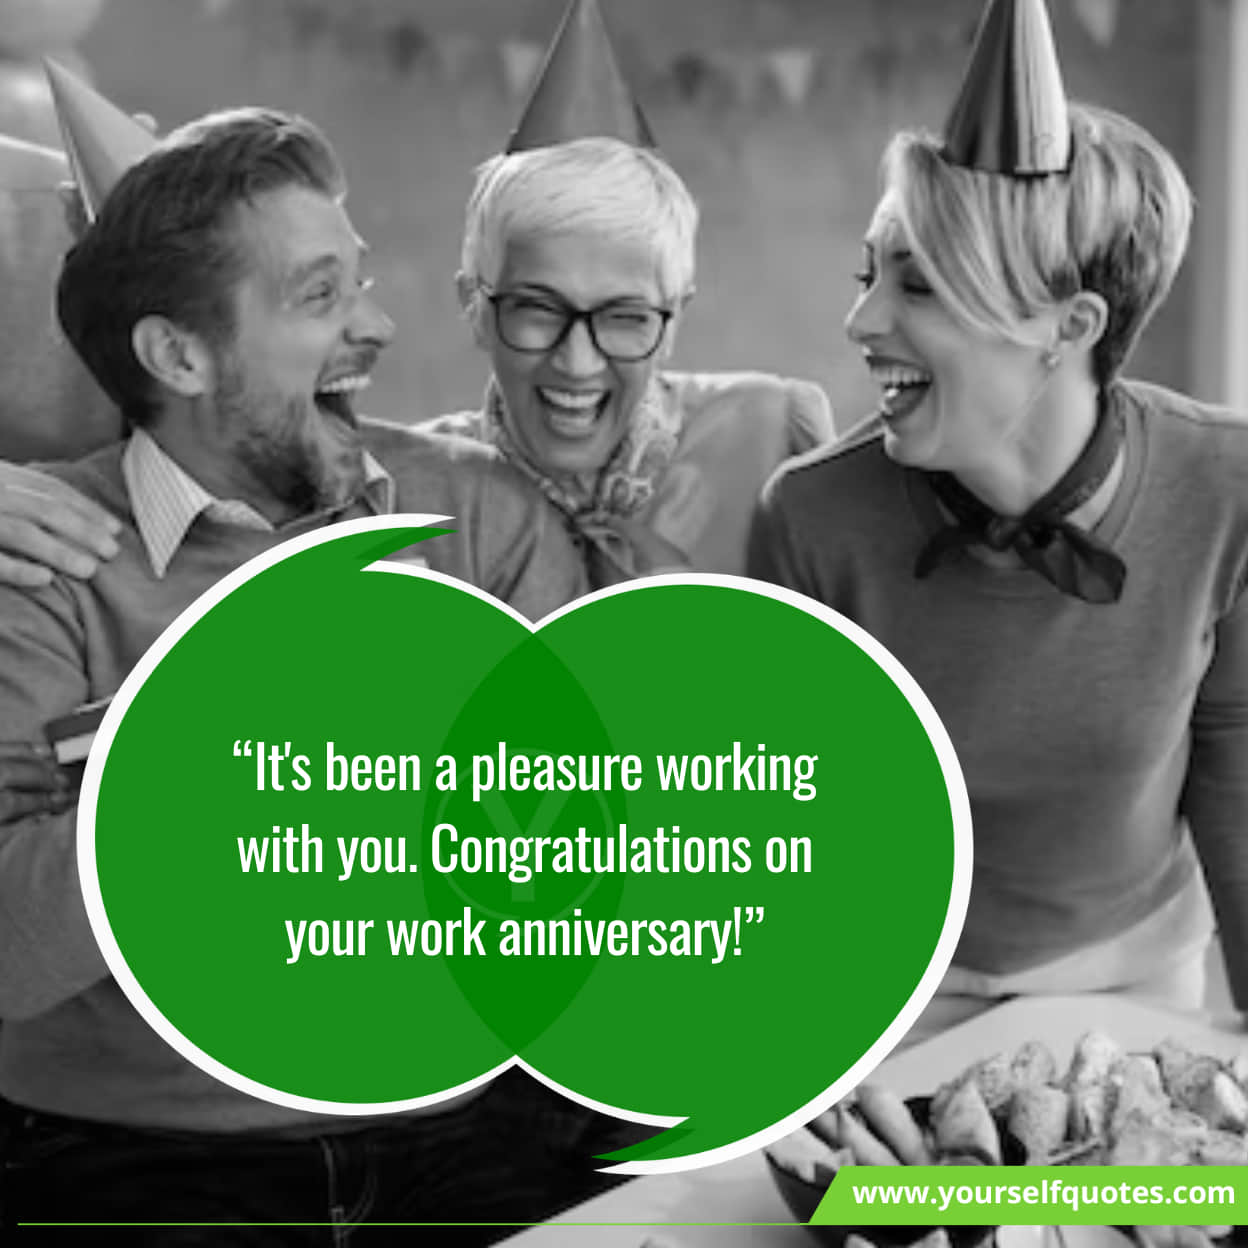 Sending best wishes on your work anniversary